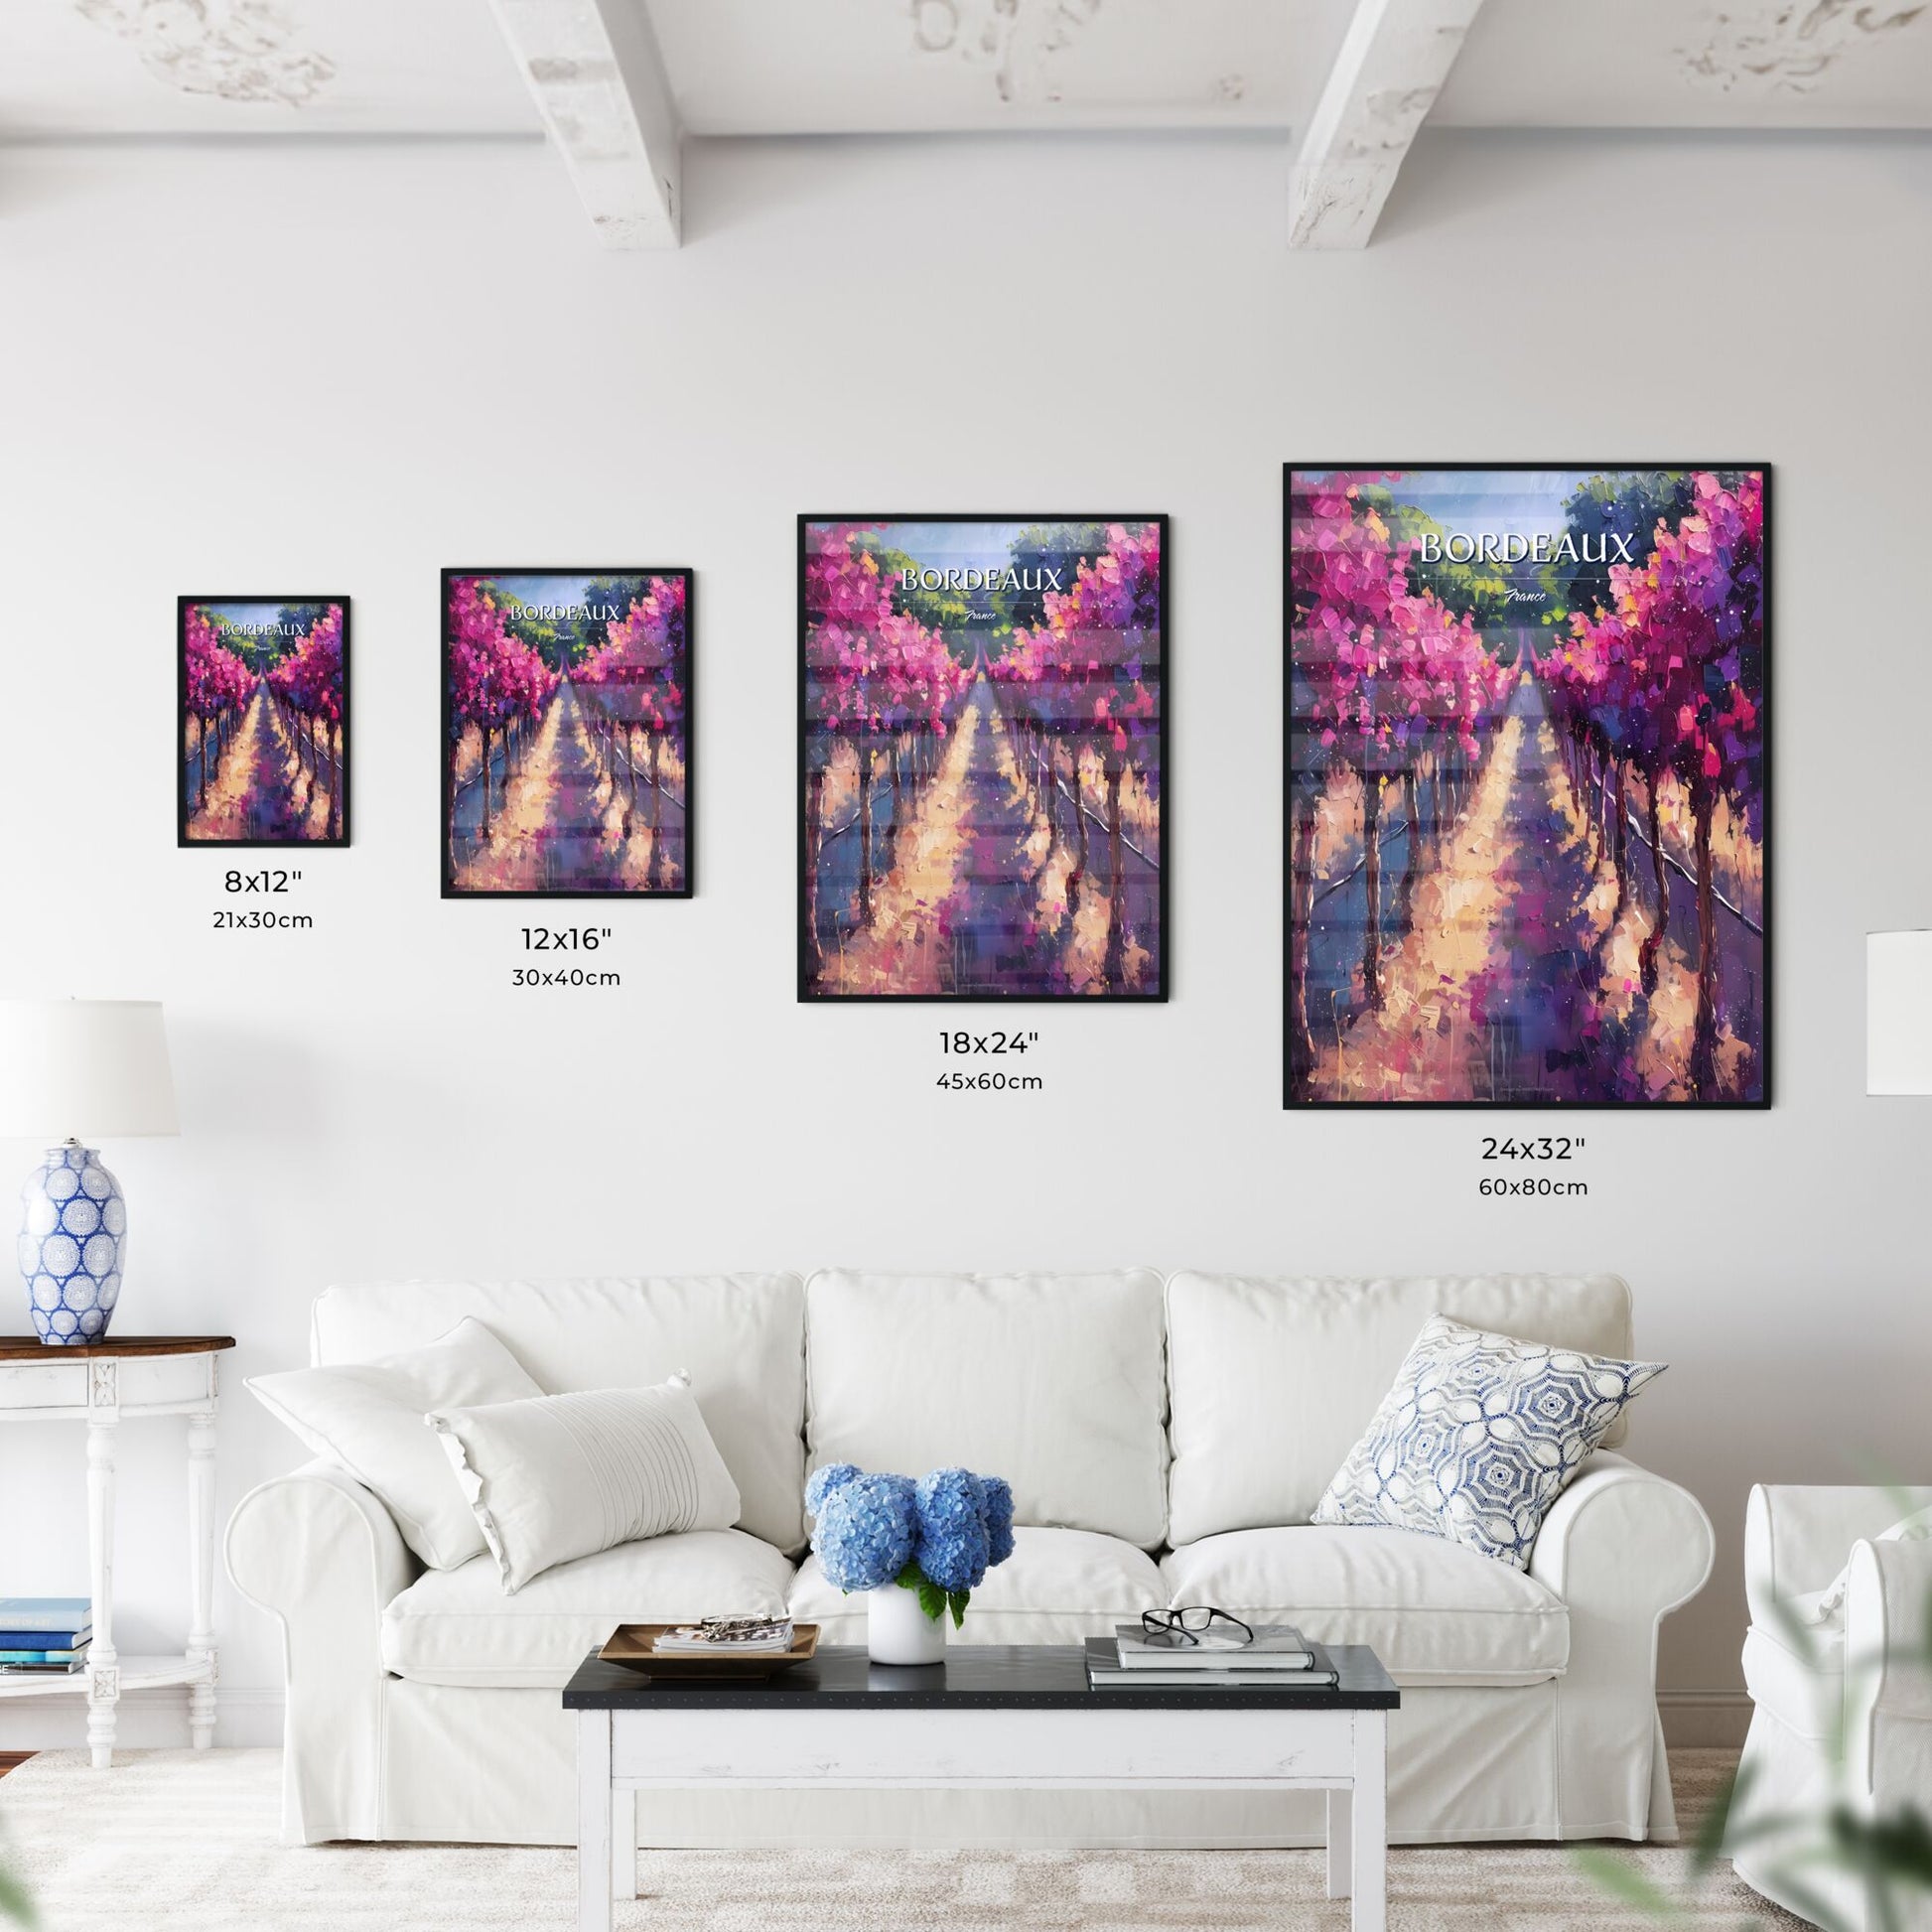 Bordeaux, France - Art print of a painting of a row of trees Default Title